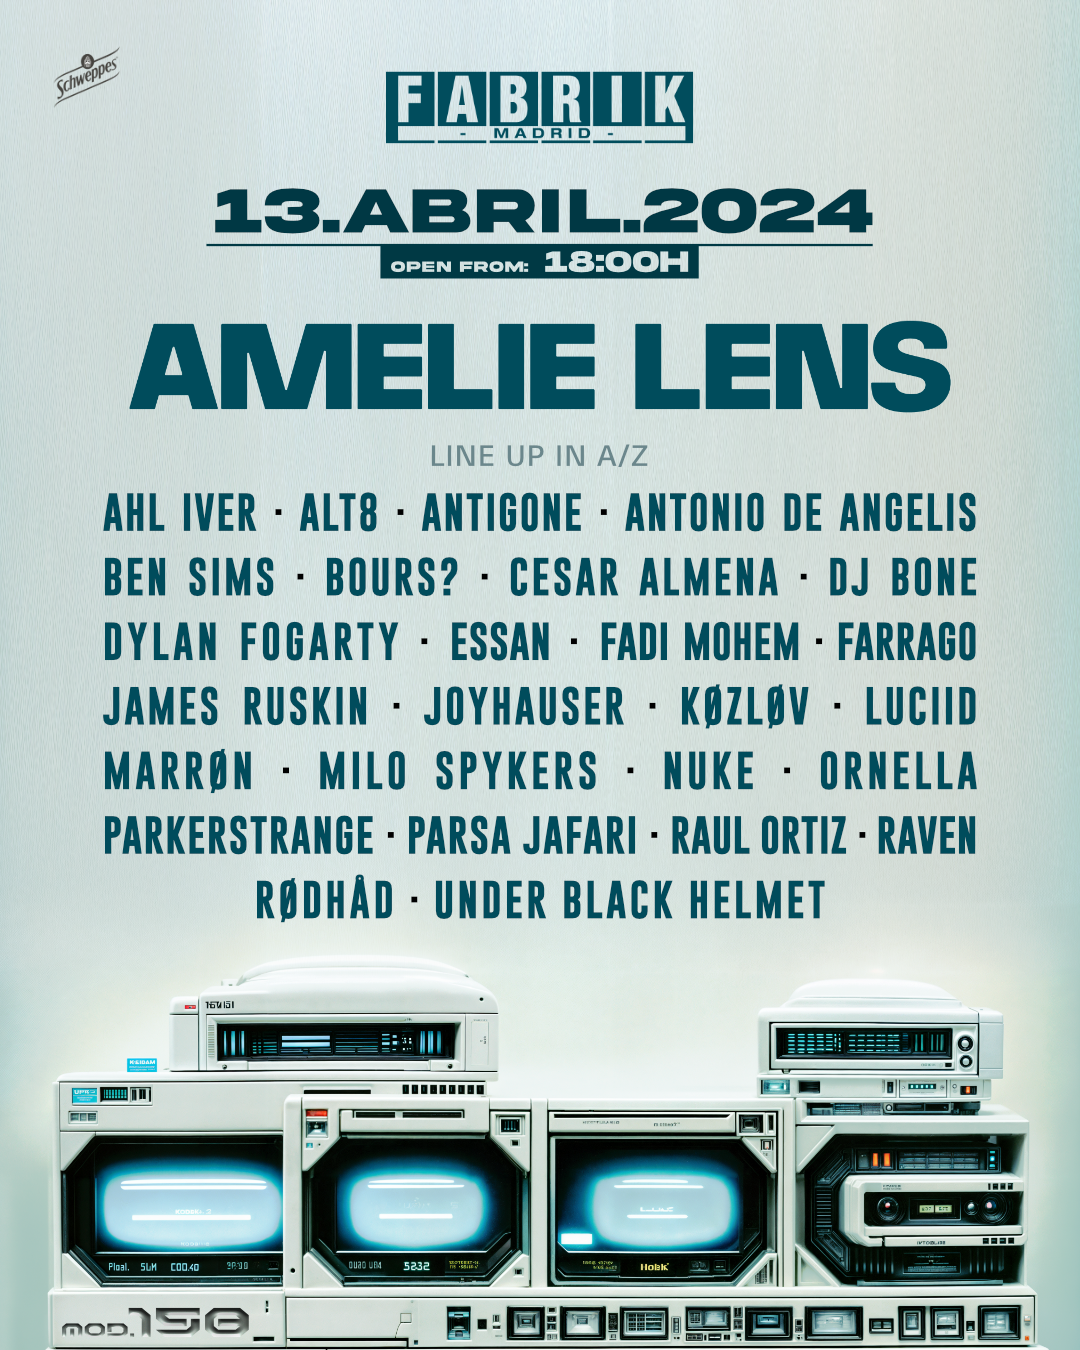 CODE 158 with Amelie Lens, Ben Sims and much more - Página frontal